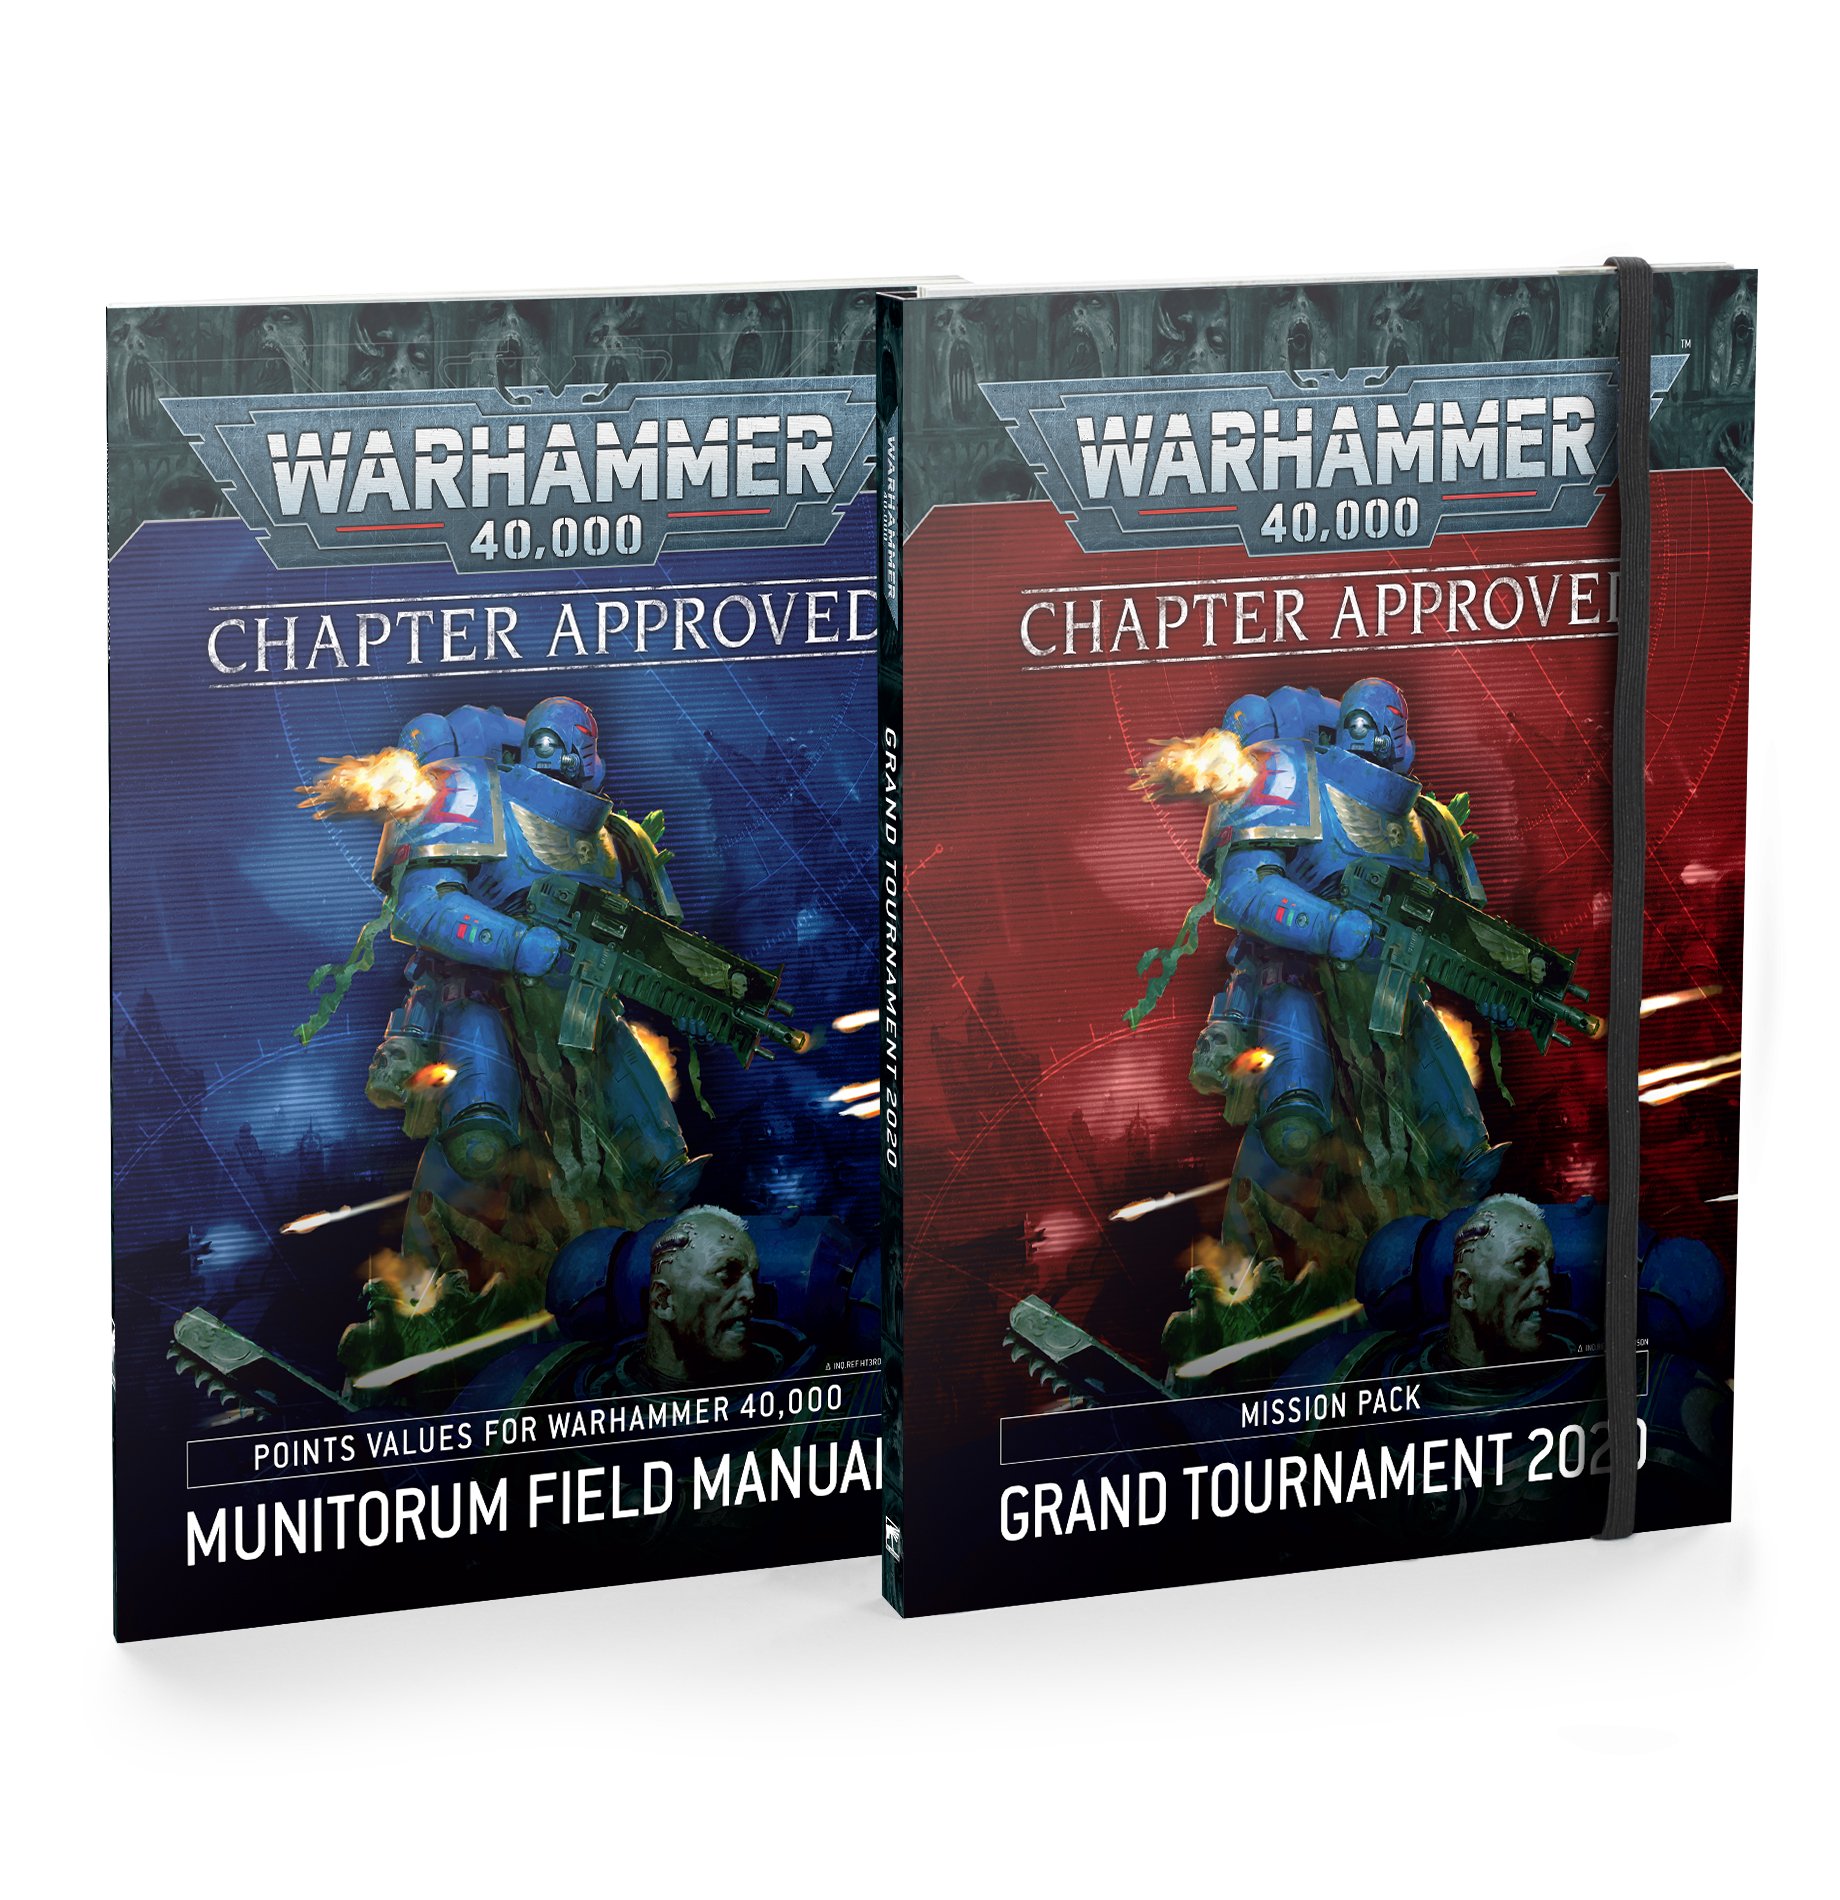 Warhammer 40,000: Chapter Approved Mission Pack: Grand Tournament Pack 2020  